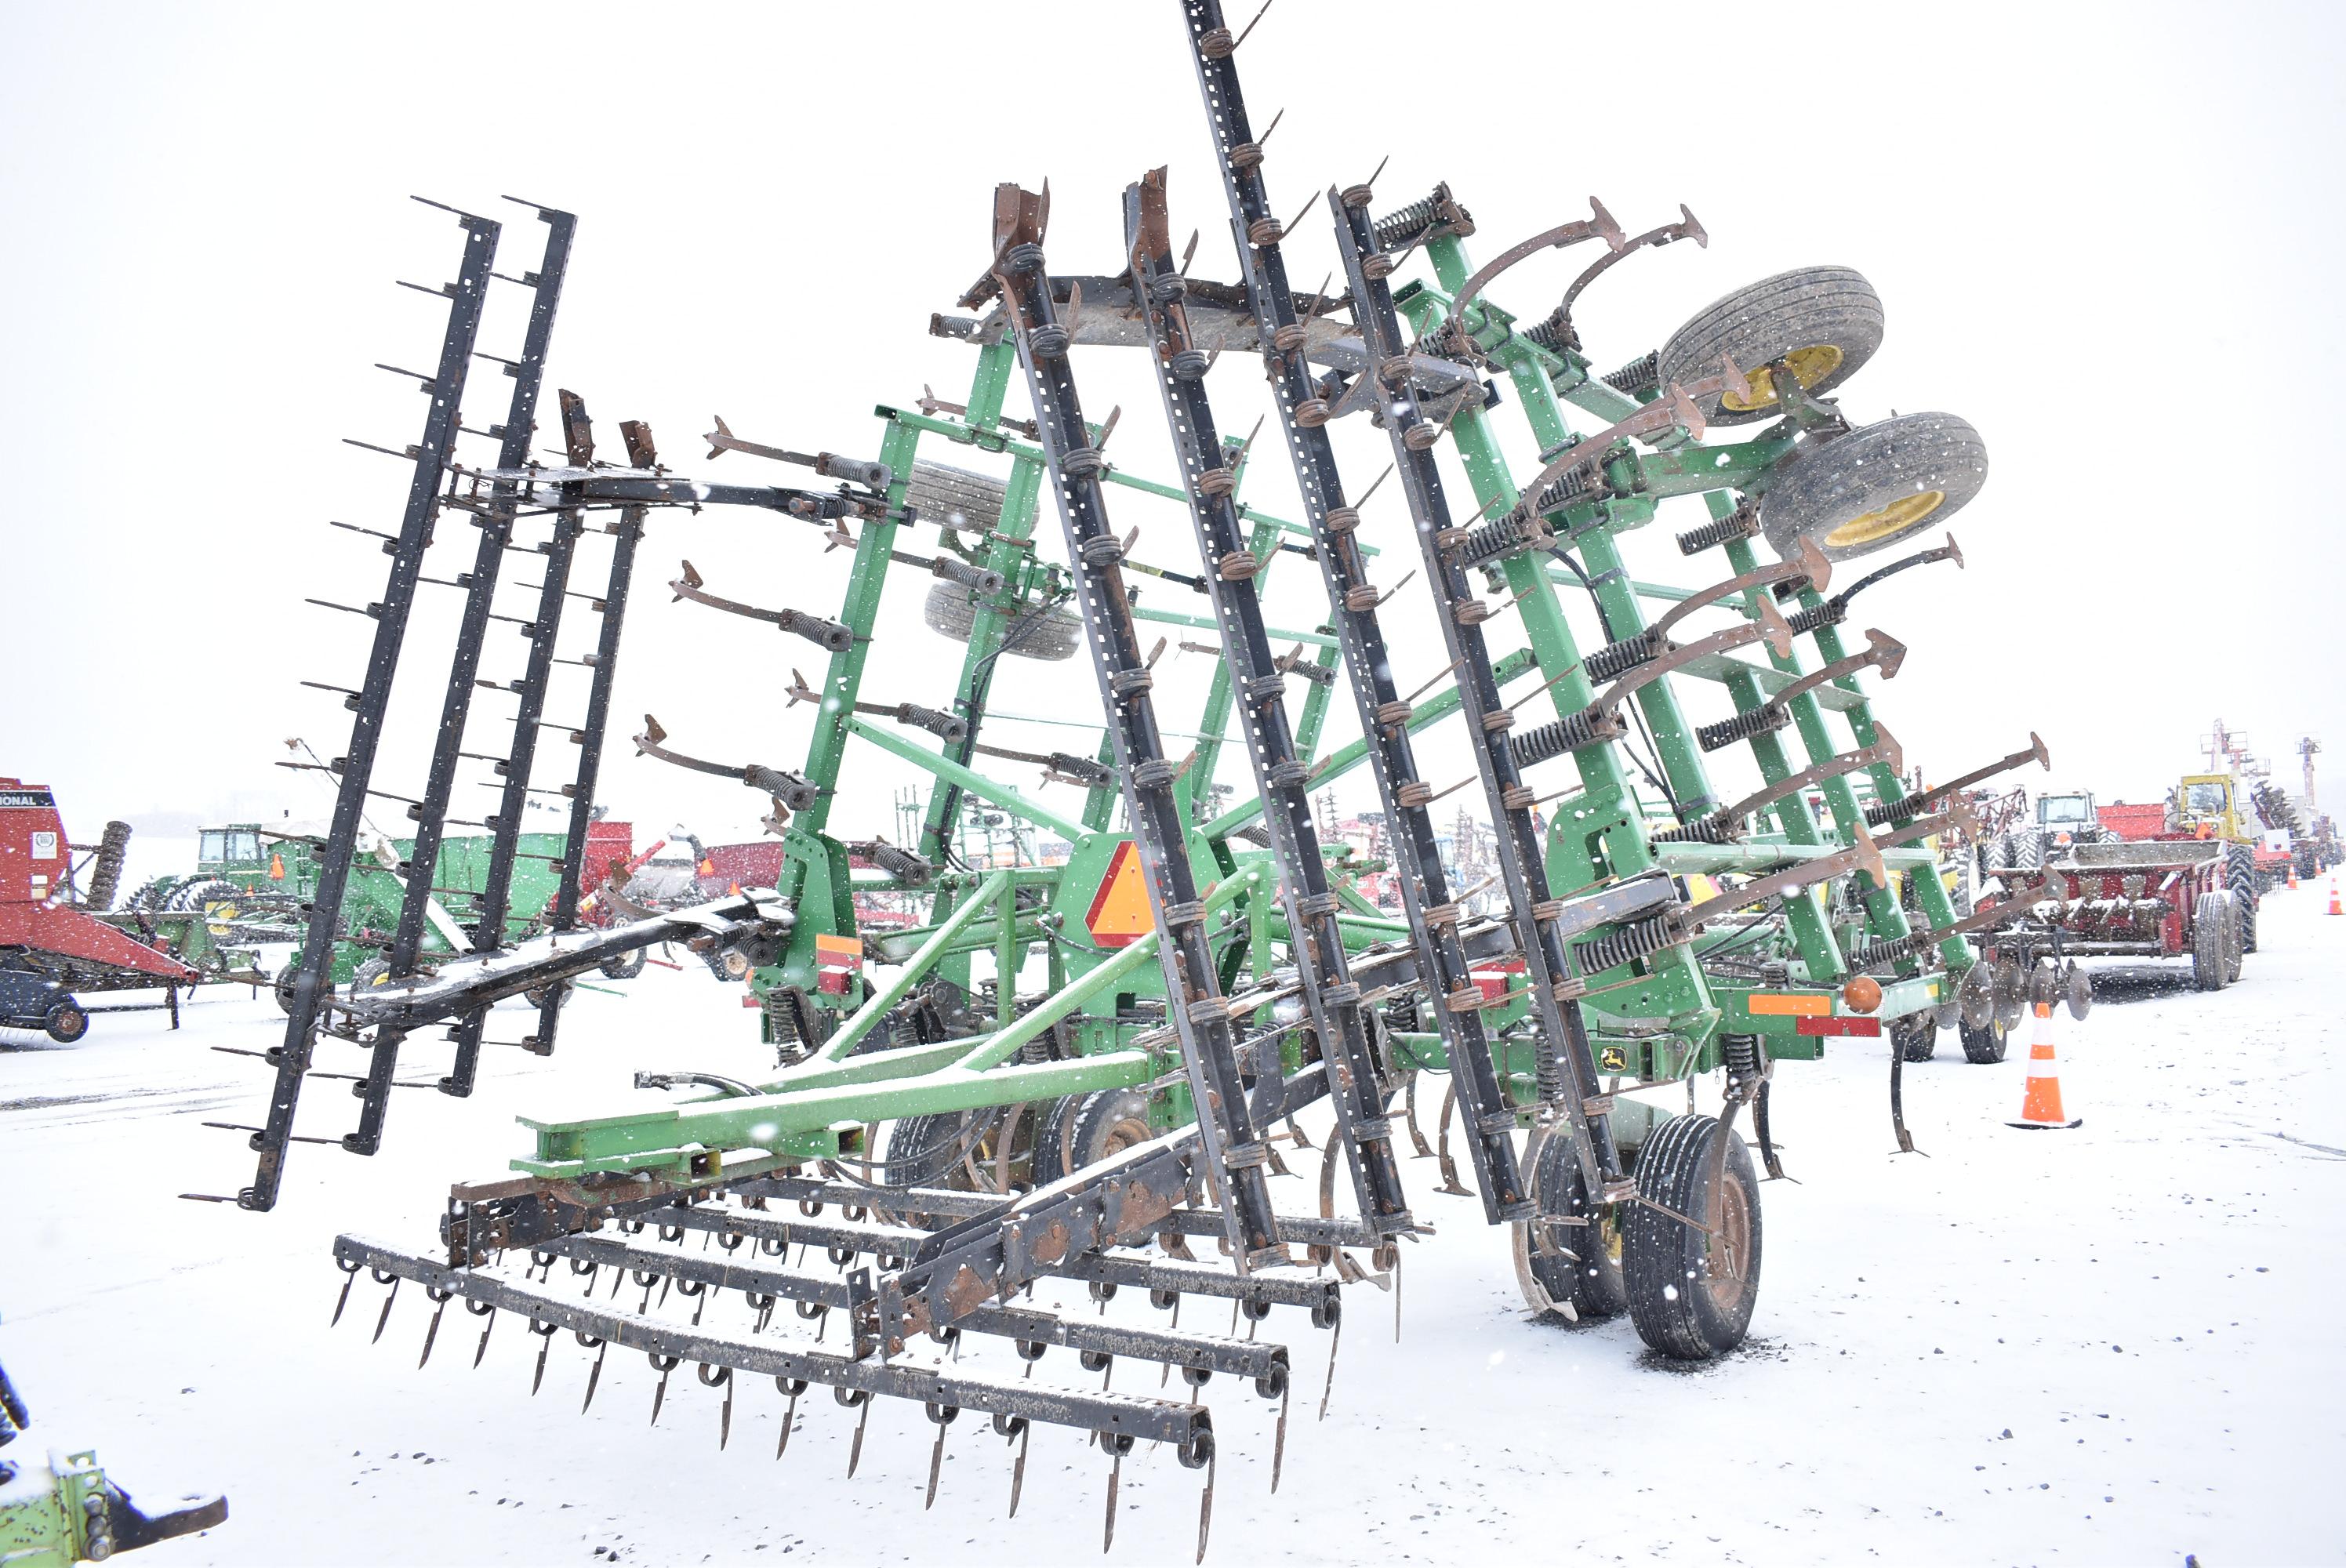 JD 2210 field cultivator w/ leveling tines